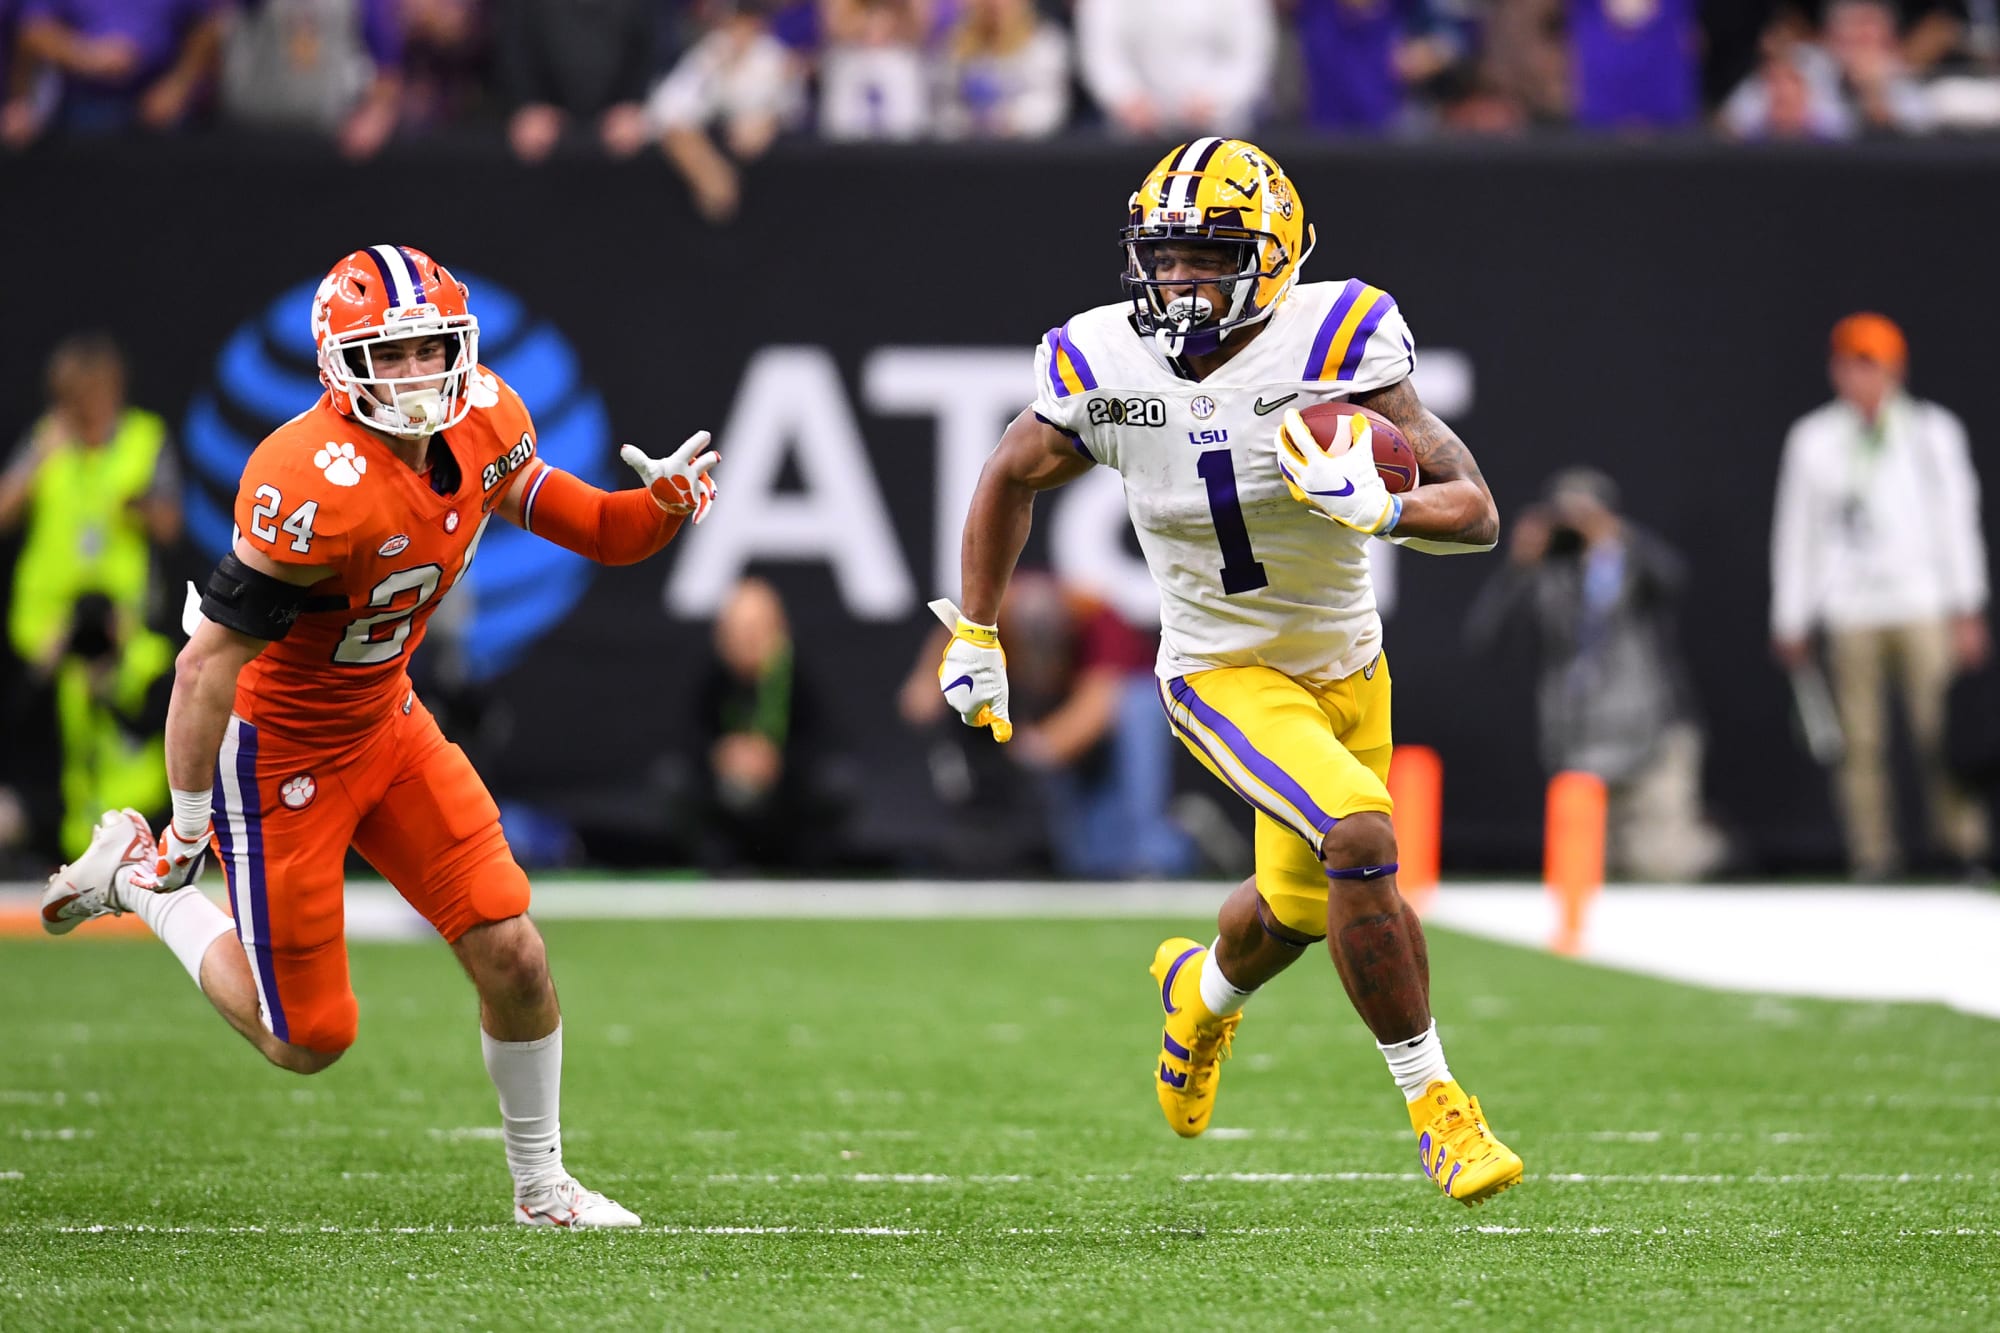 LSU football receives some respect in Sporting News Top 25